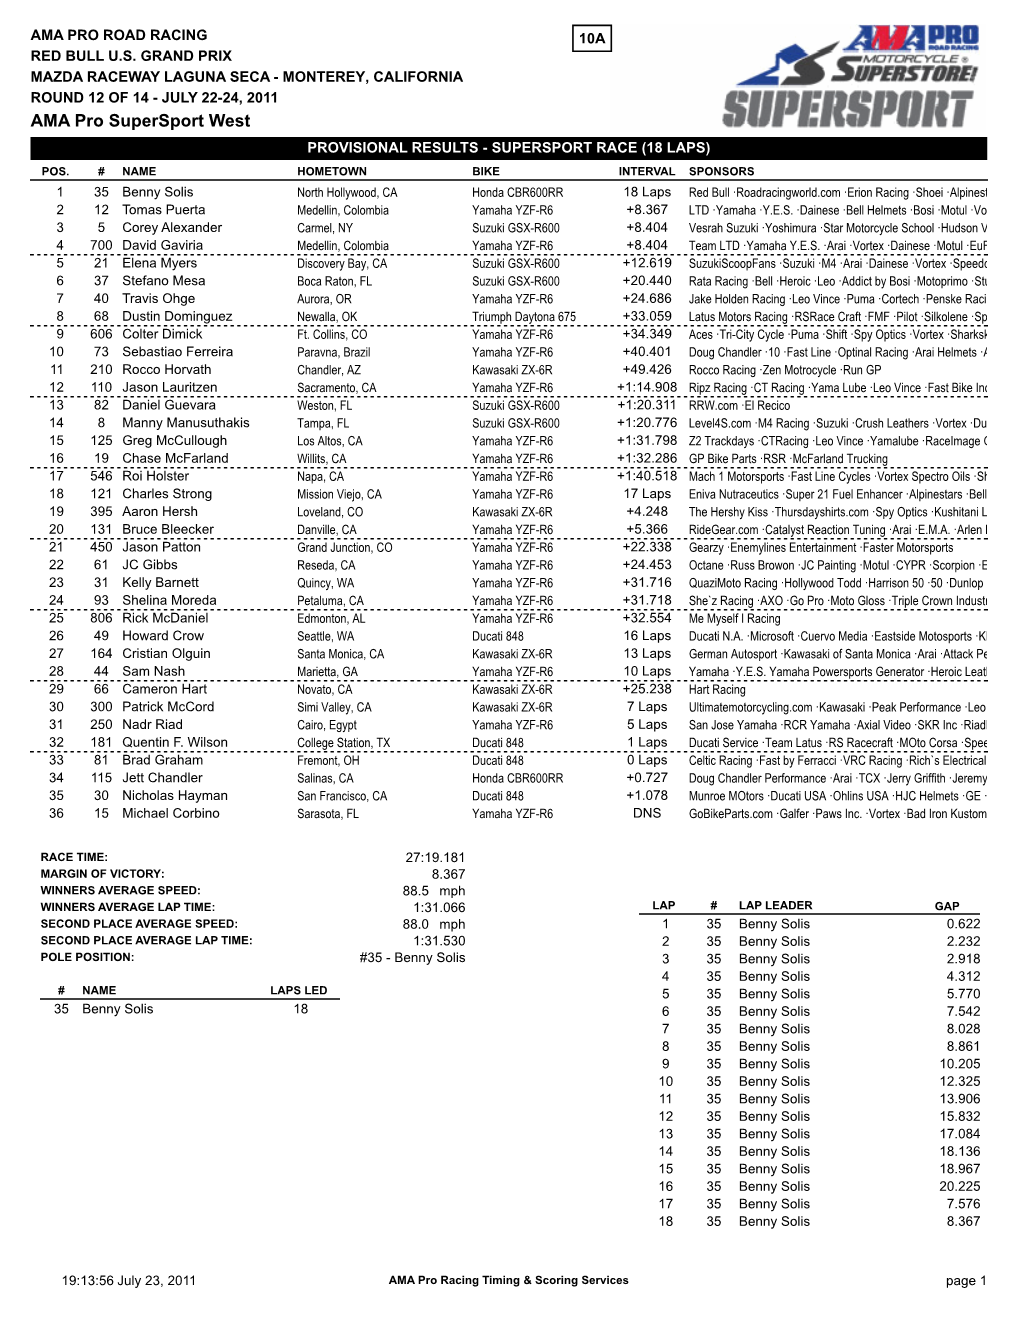 AMA Pro Supersport West PROVISIONAL RESULTS - SUPERSPORT RACE (18 LAPS) POS